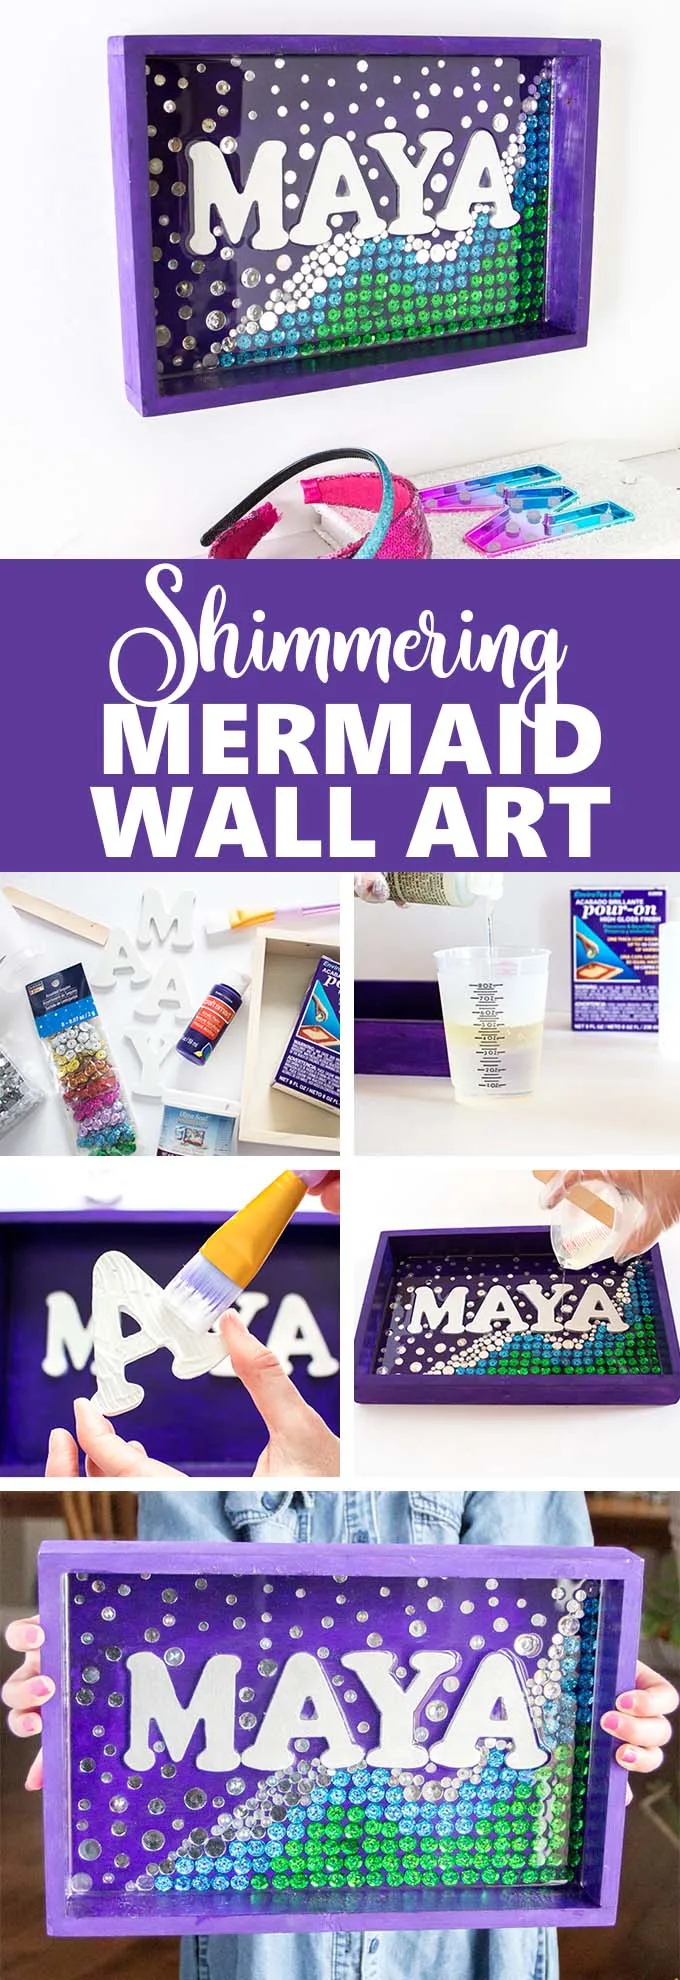 Collage of images to make a shimmering mermaid wall decor idea